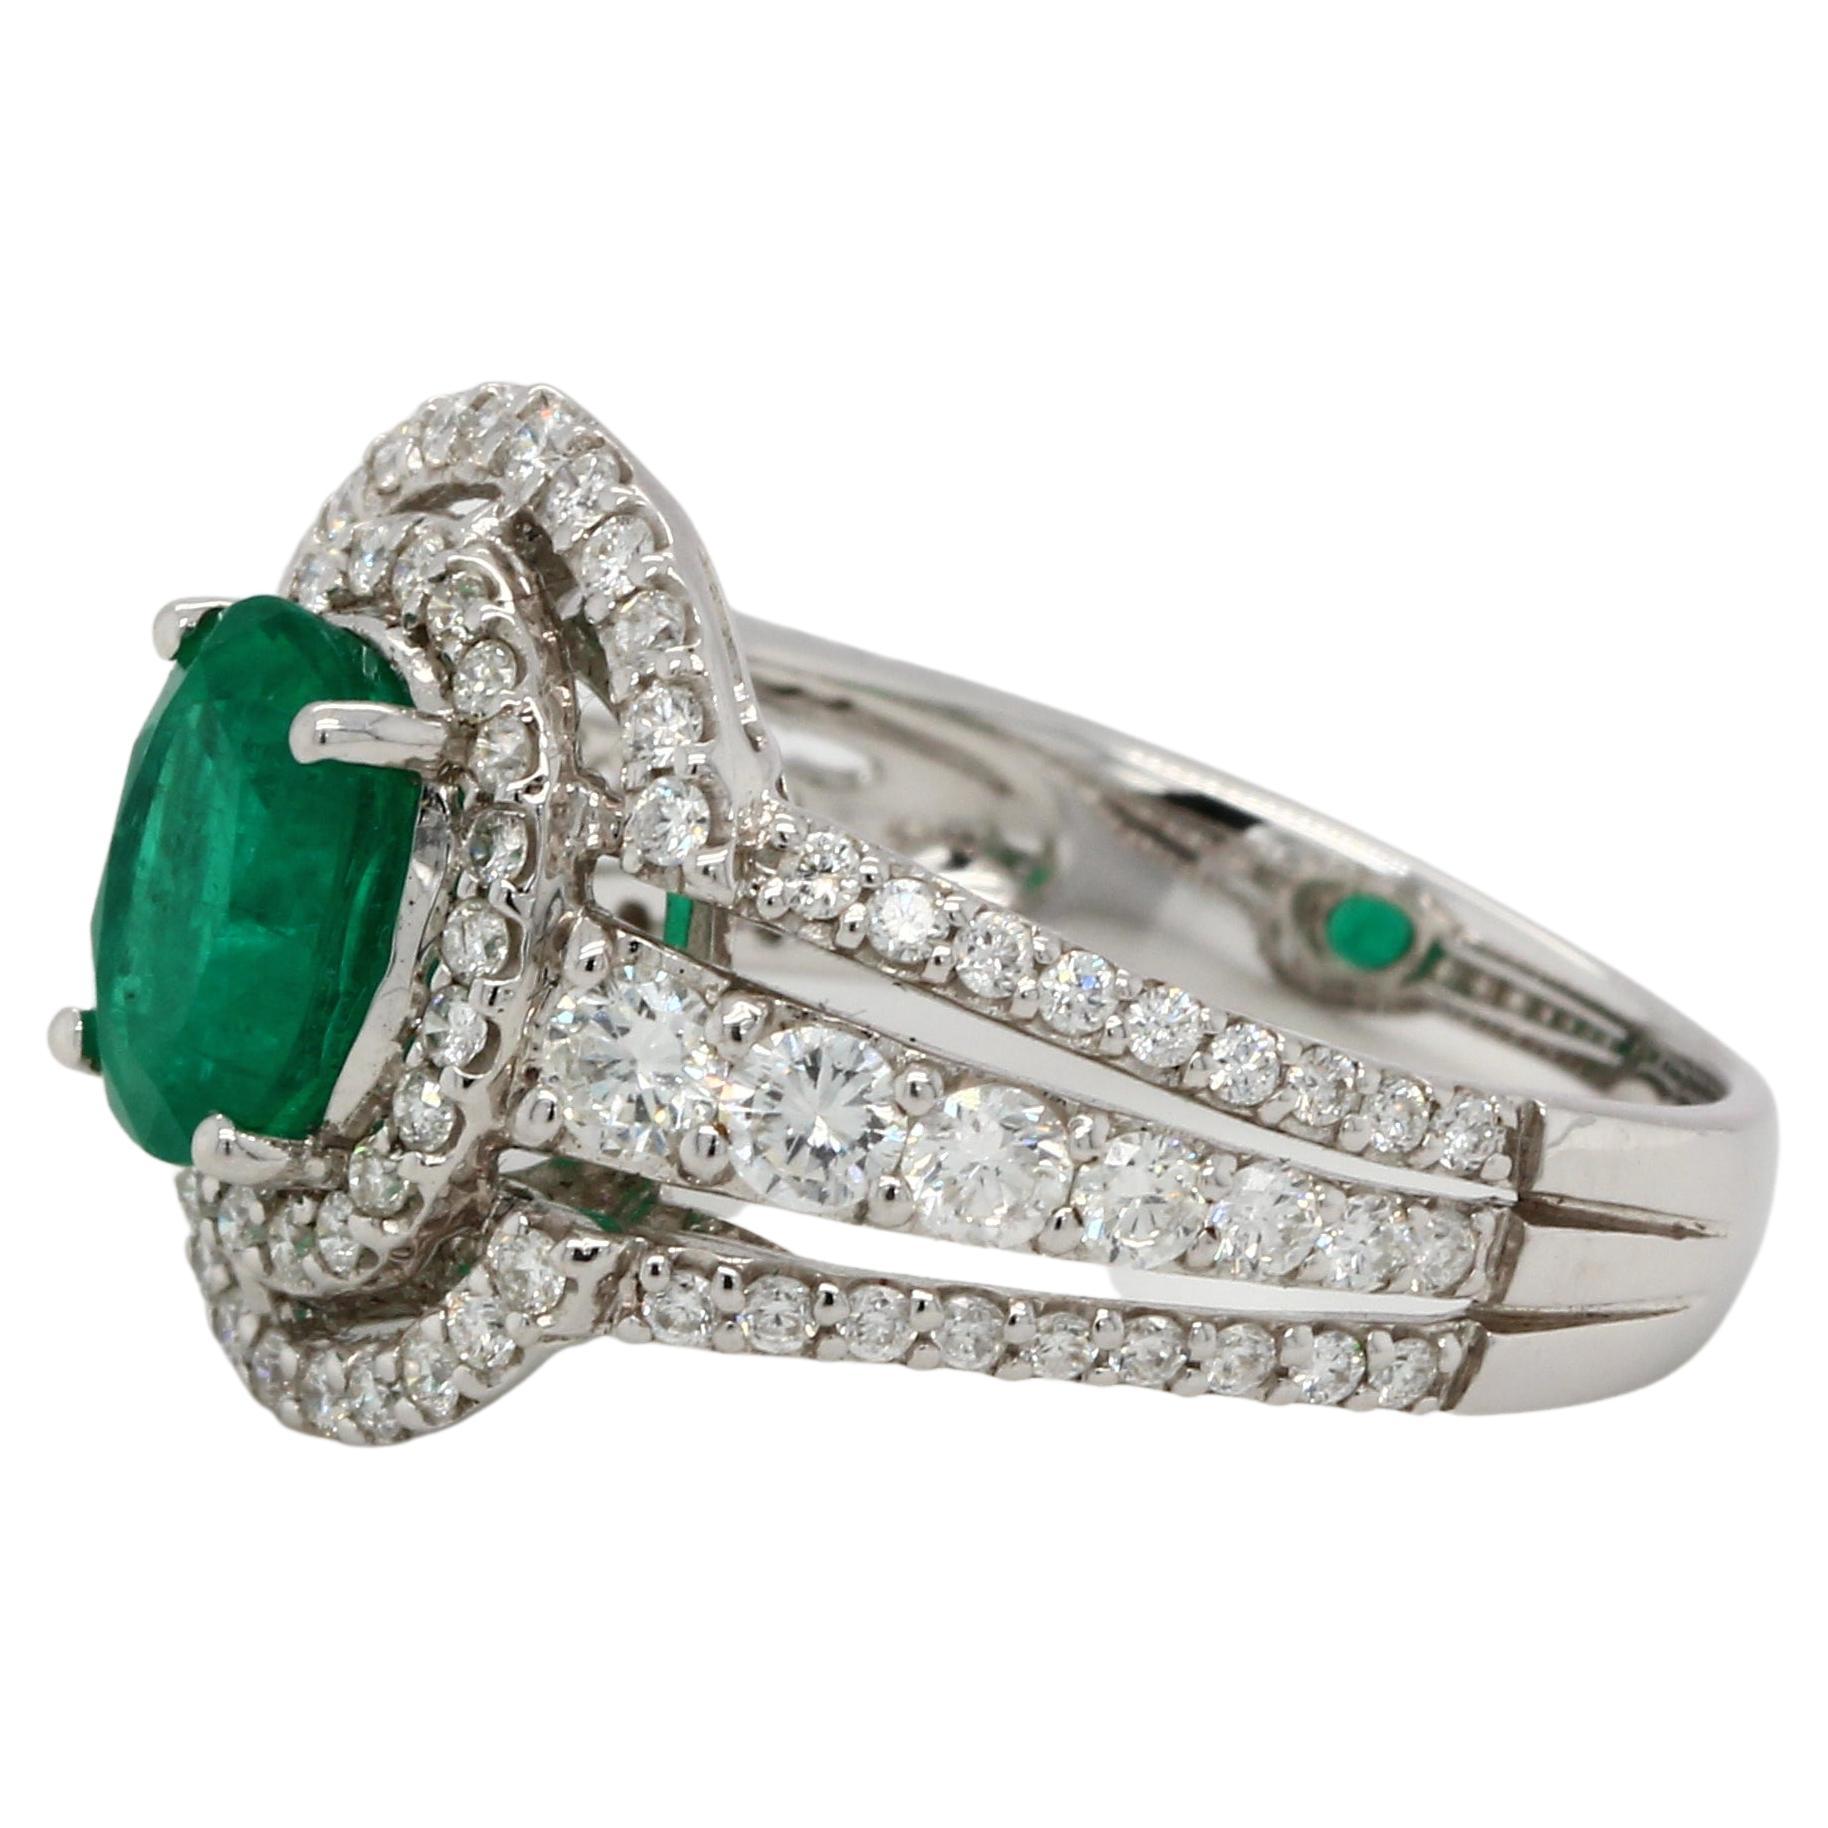 A brand new 18K gold ring with emerald and diamond. This ring features a 1.36 carat emerald oval shape with a 1.00 carat diamond round. This ring is made of 18K white gold and weighs 4.66 grams.

Allure Jewellery Mfg. Co., Ltd. stands out due to its